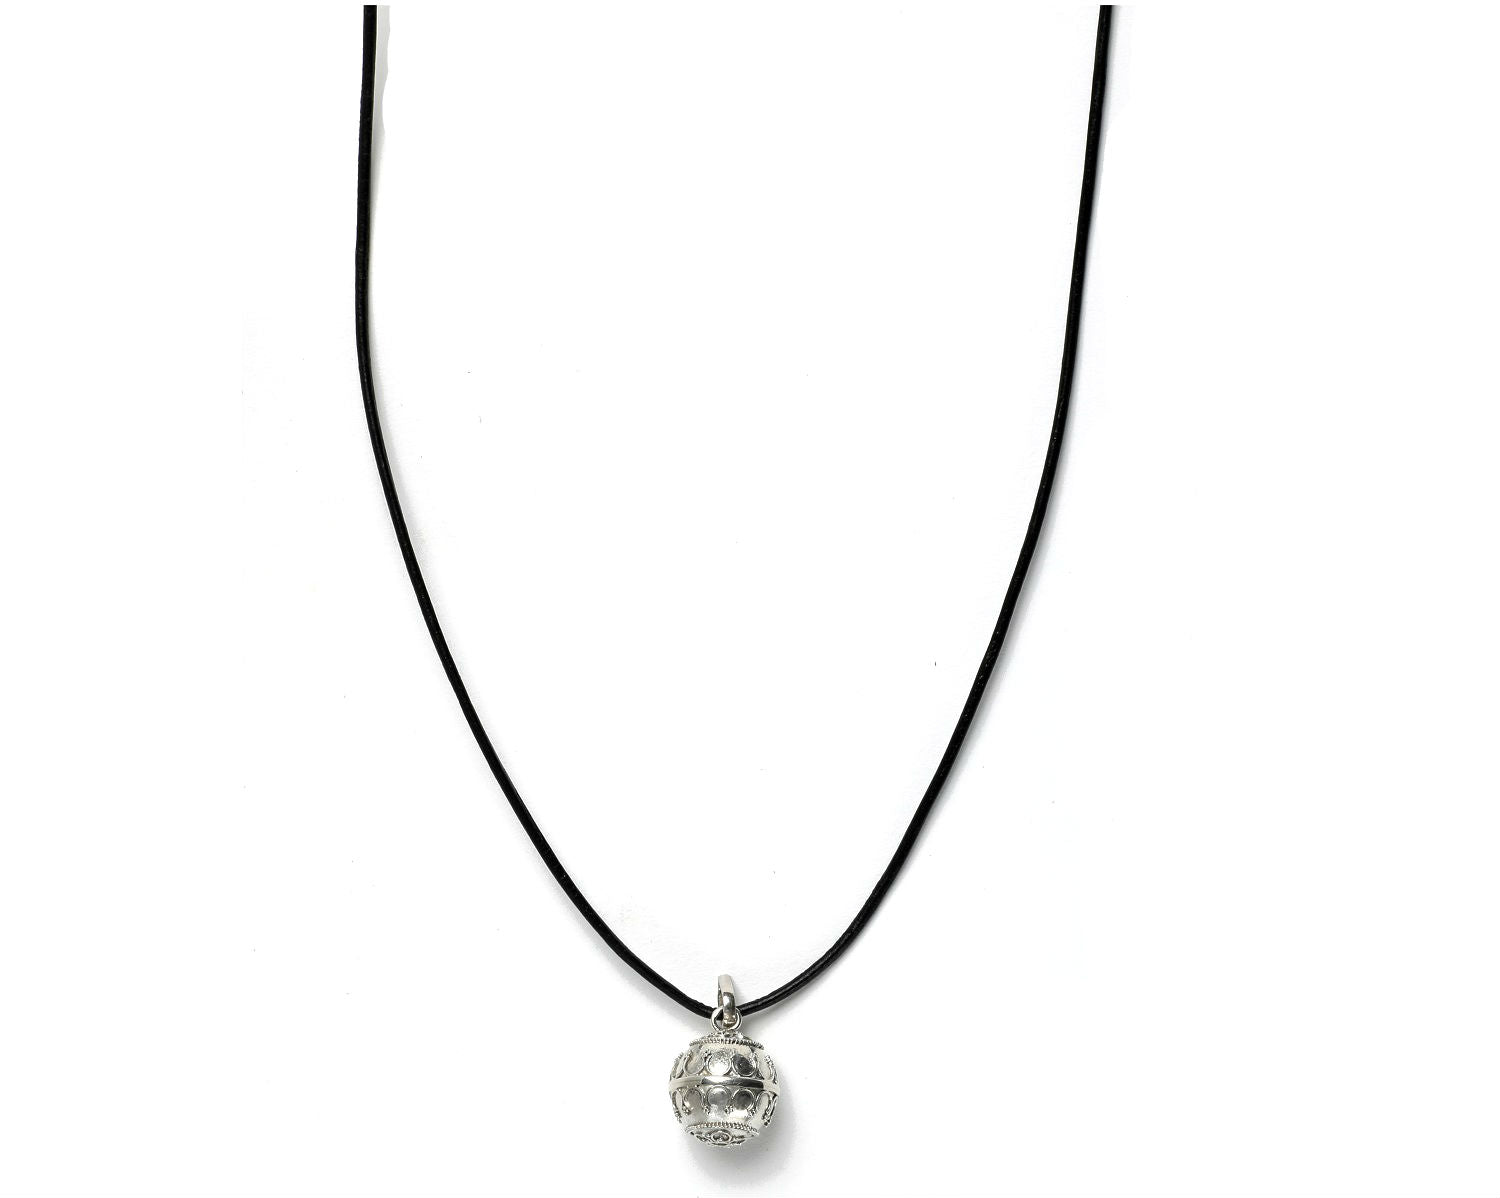 Harmony ball pendant strung in a black leather cord